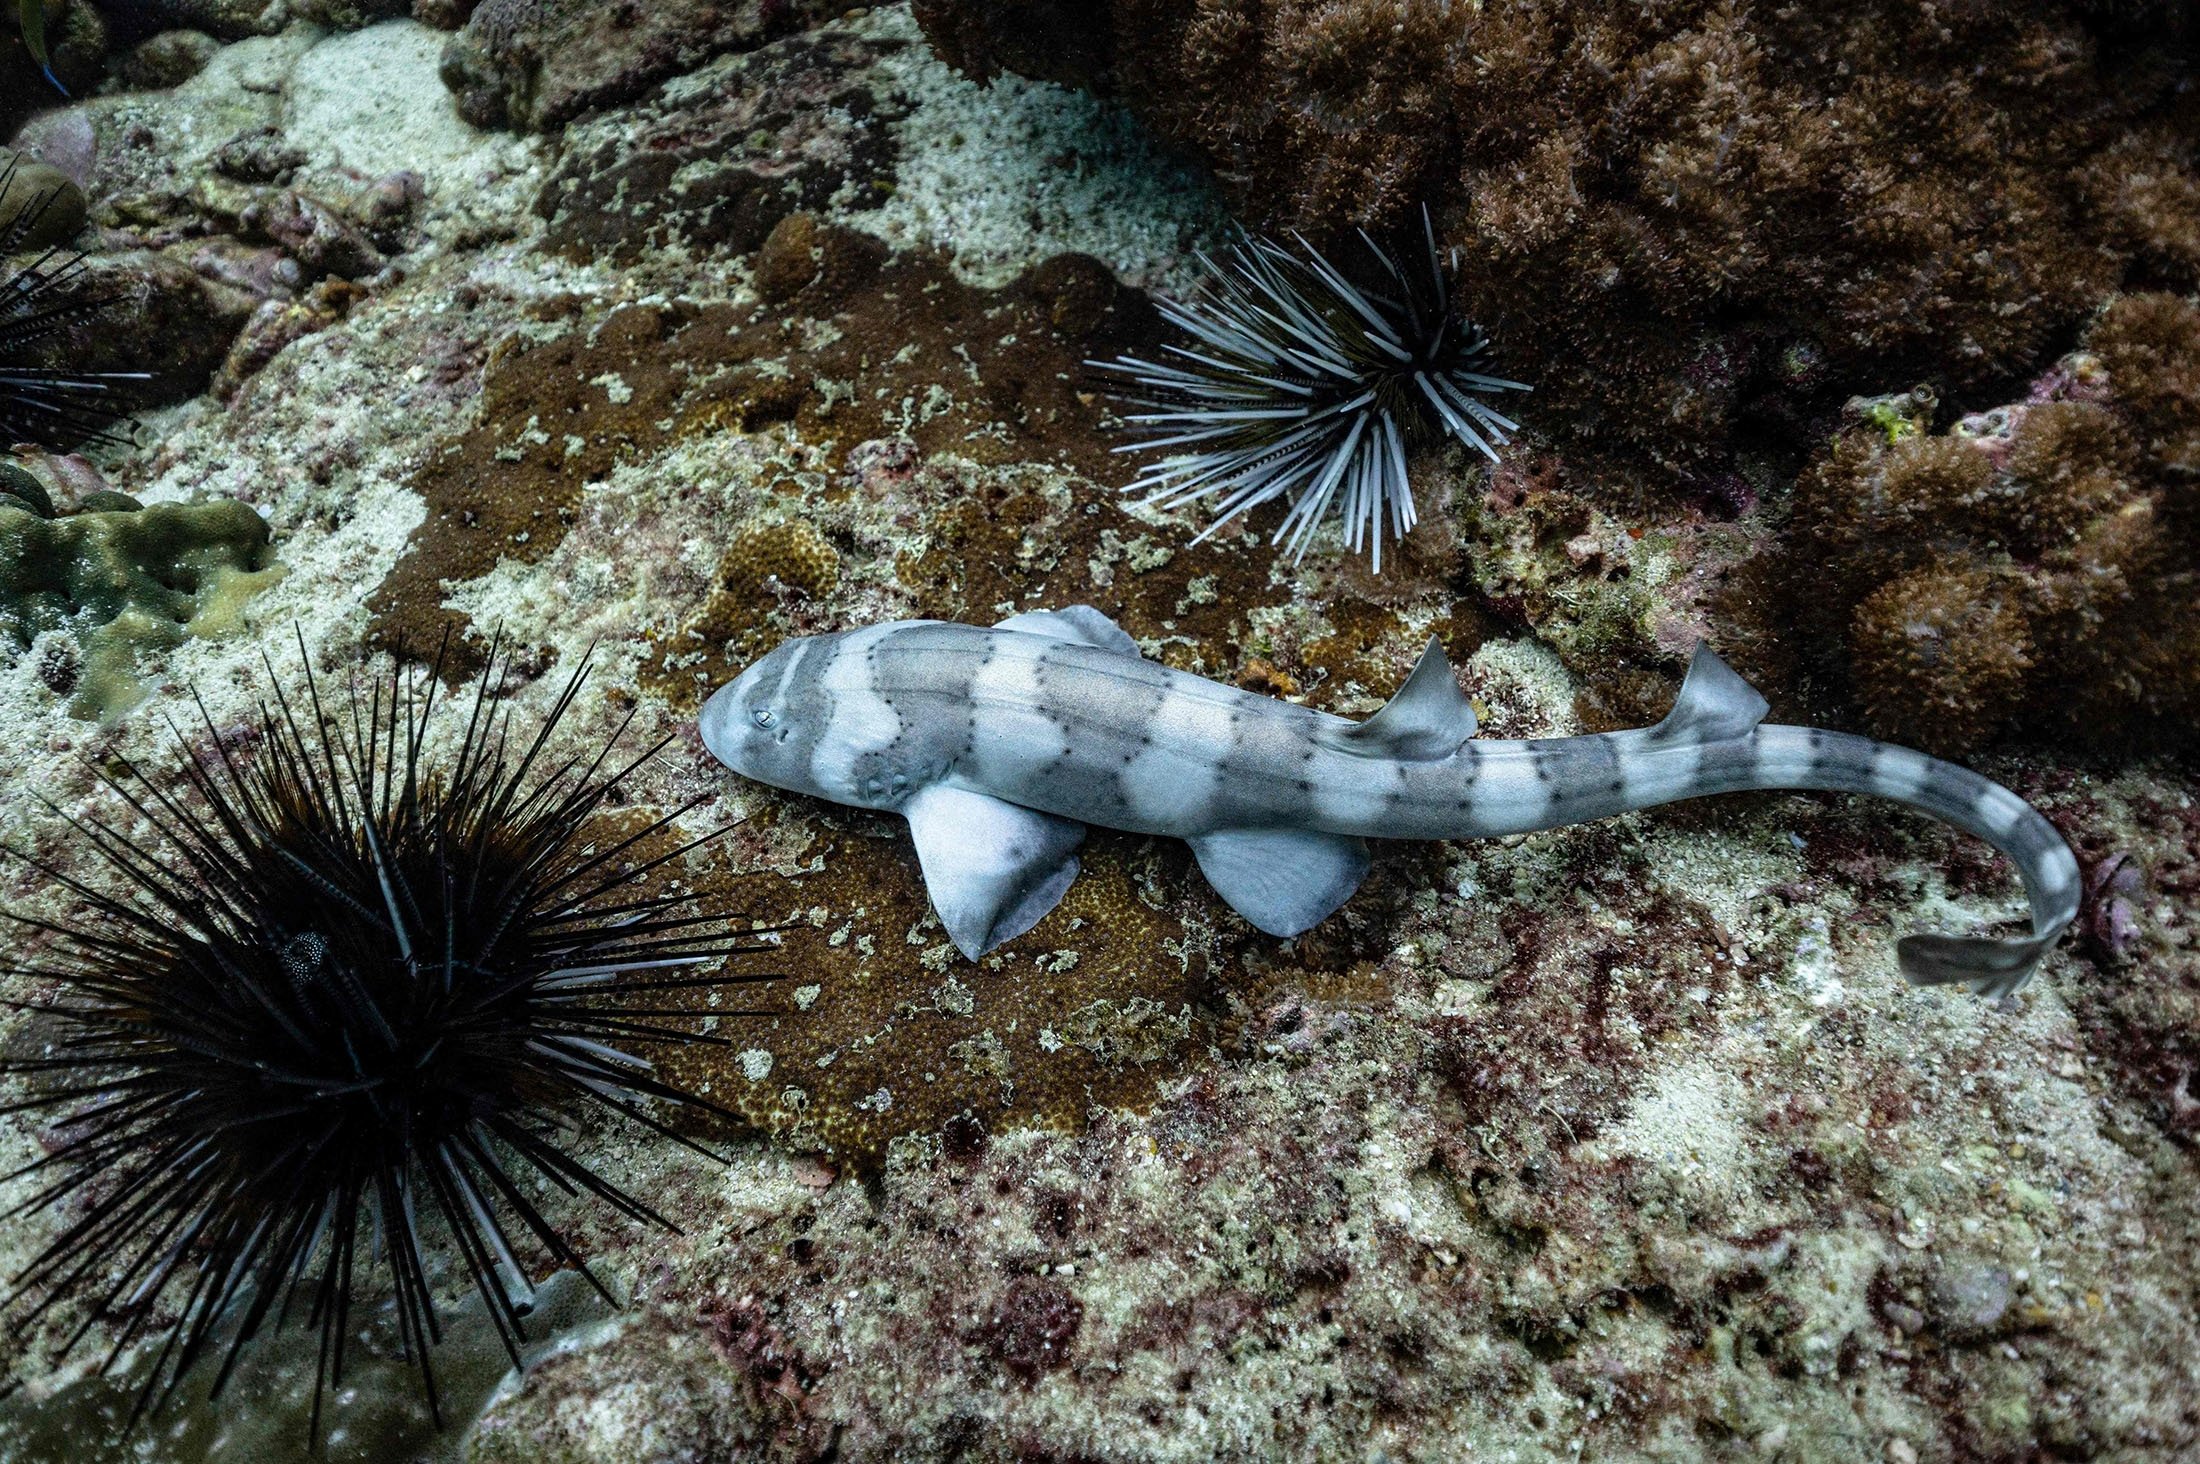 A bamboo shark swims on the seabed after being released into the sea off the Ko Ma island on the Andaman coast, Thailand, Nov. 25, 2021. (AFP Photo)